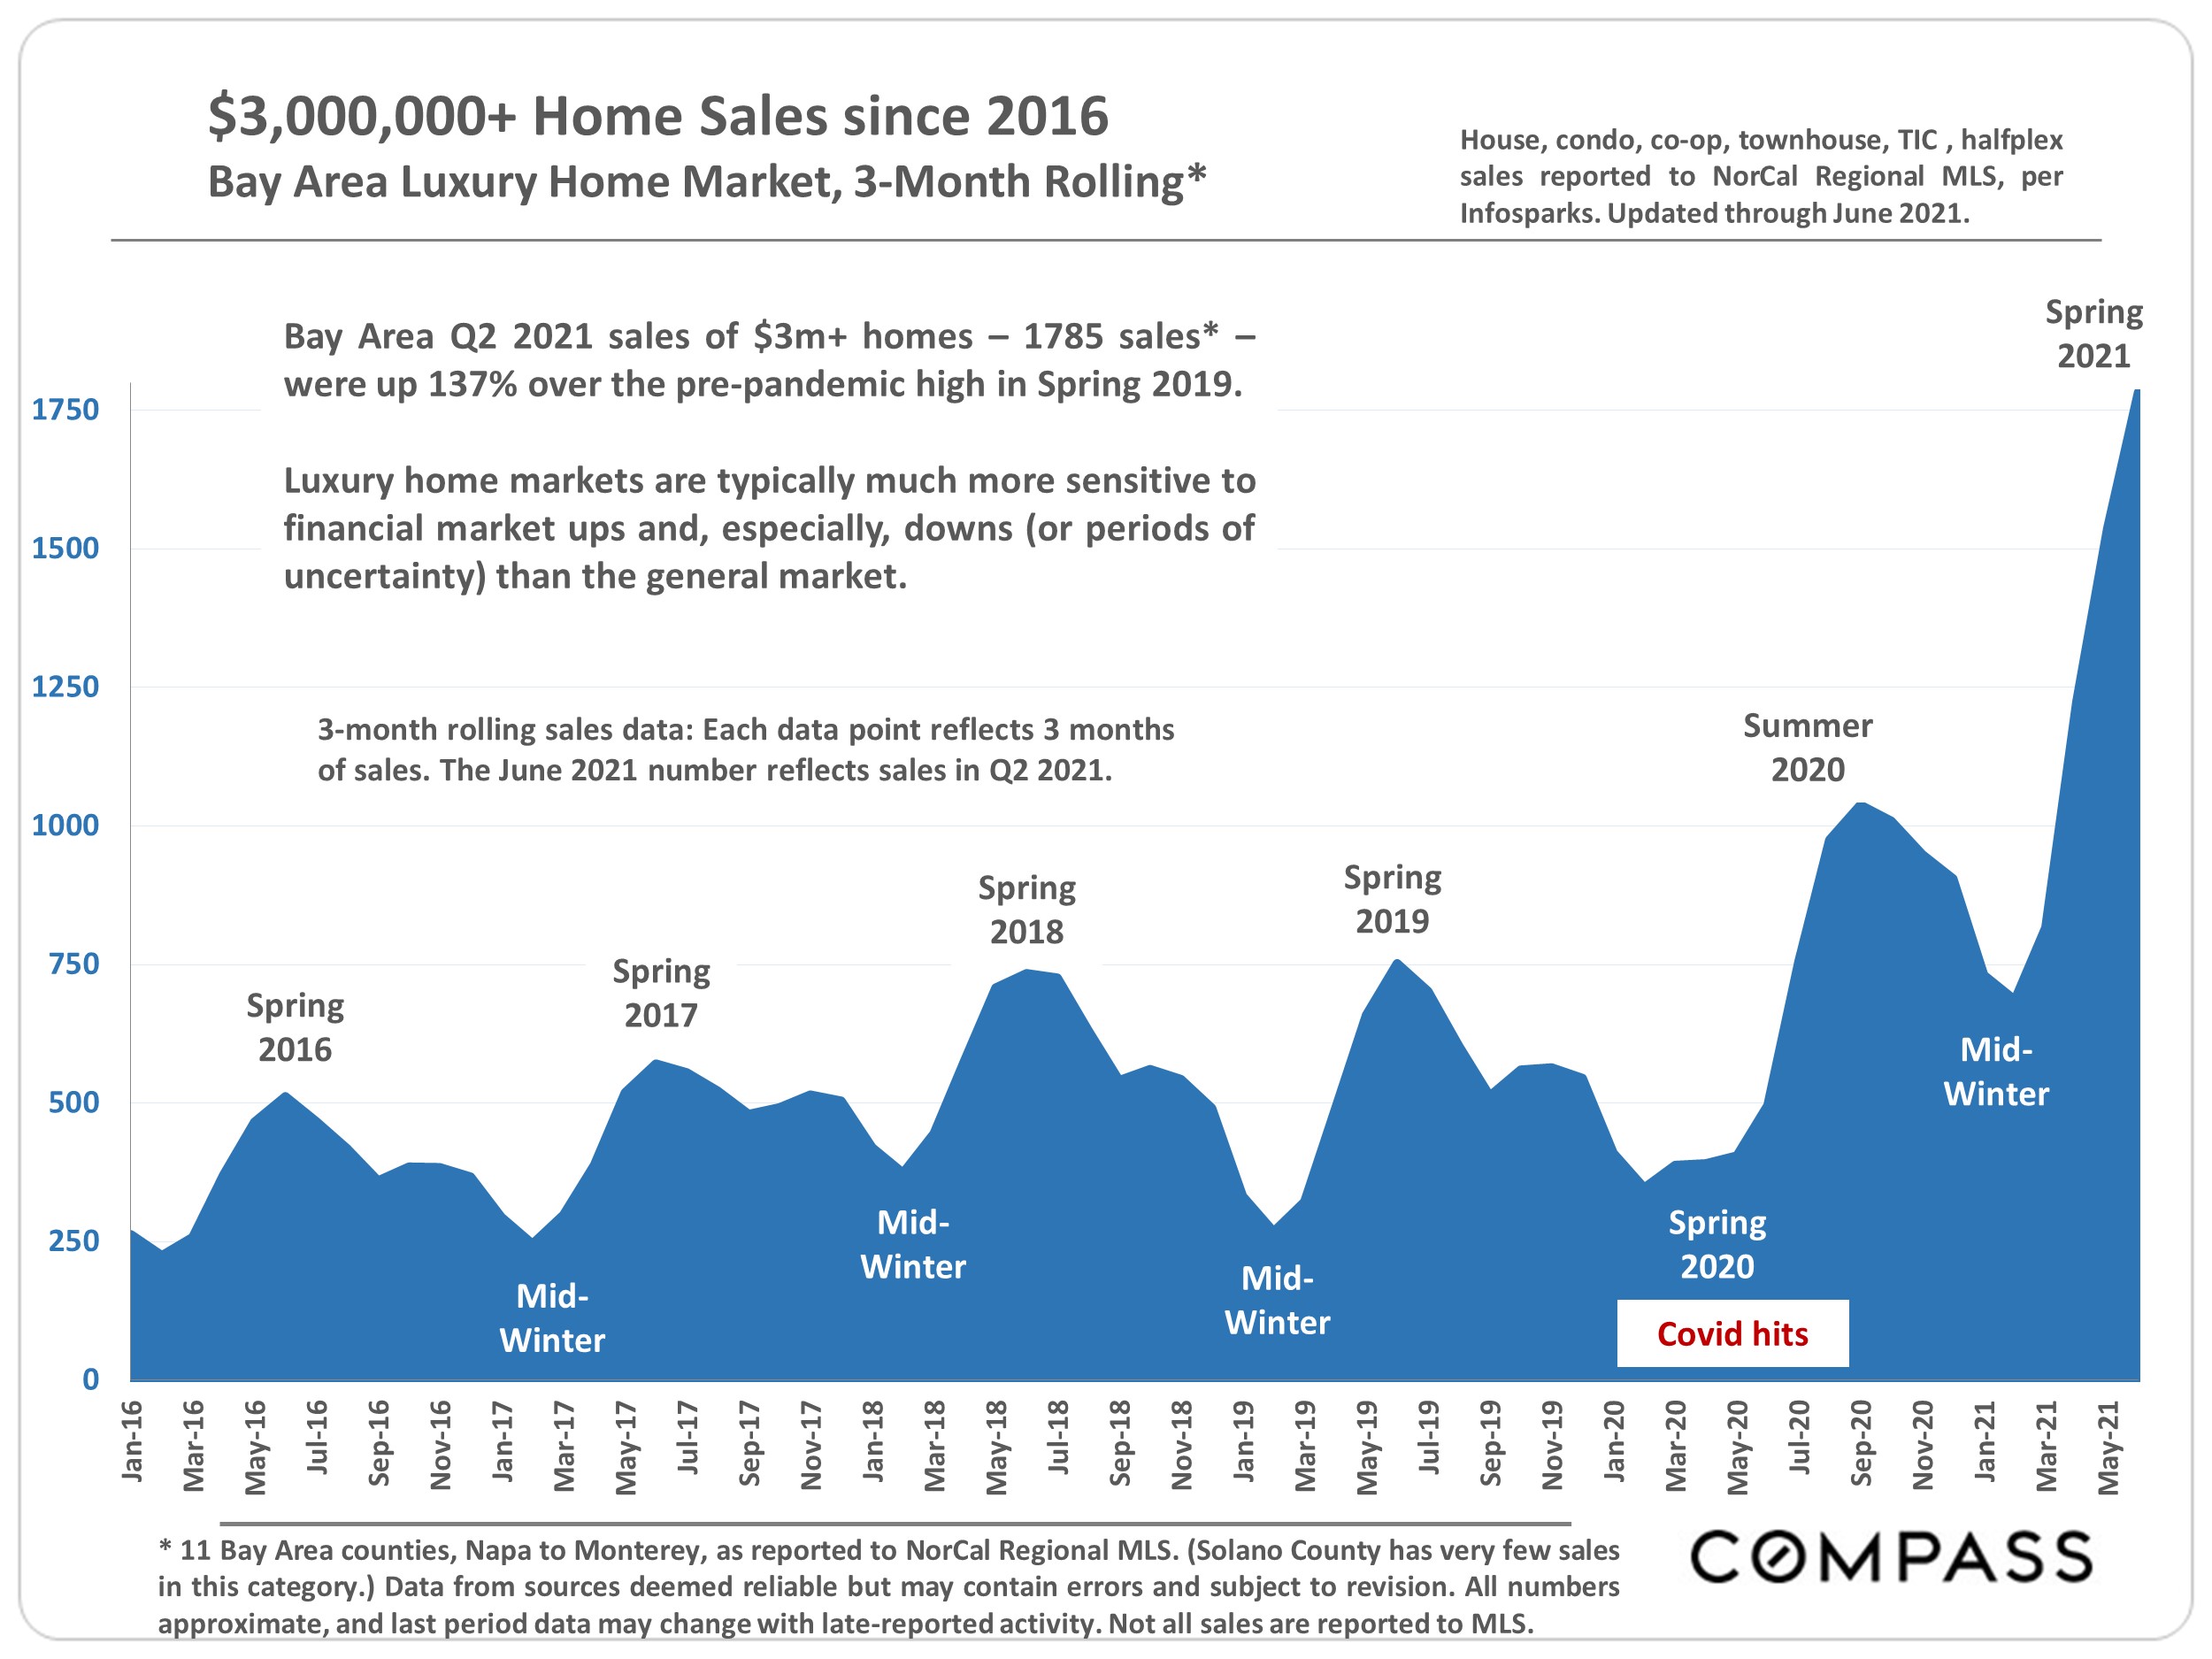 Bay Area Real Estate - Home Prices, Trends & Factors - Compass